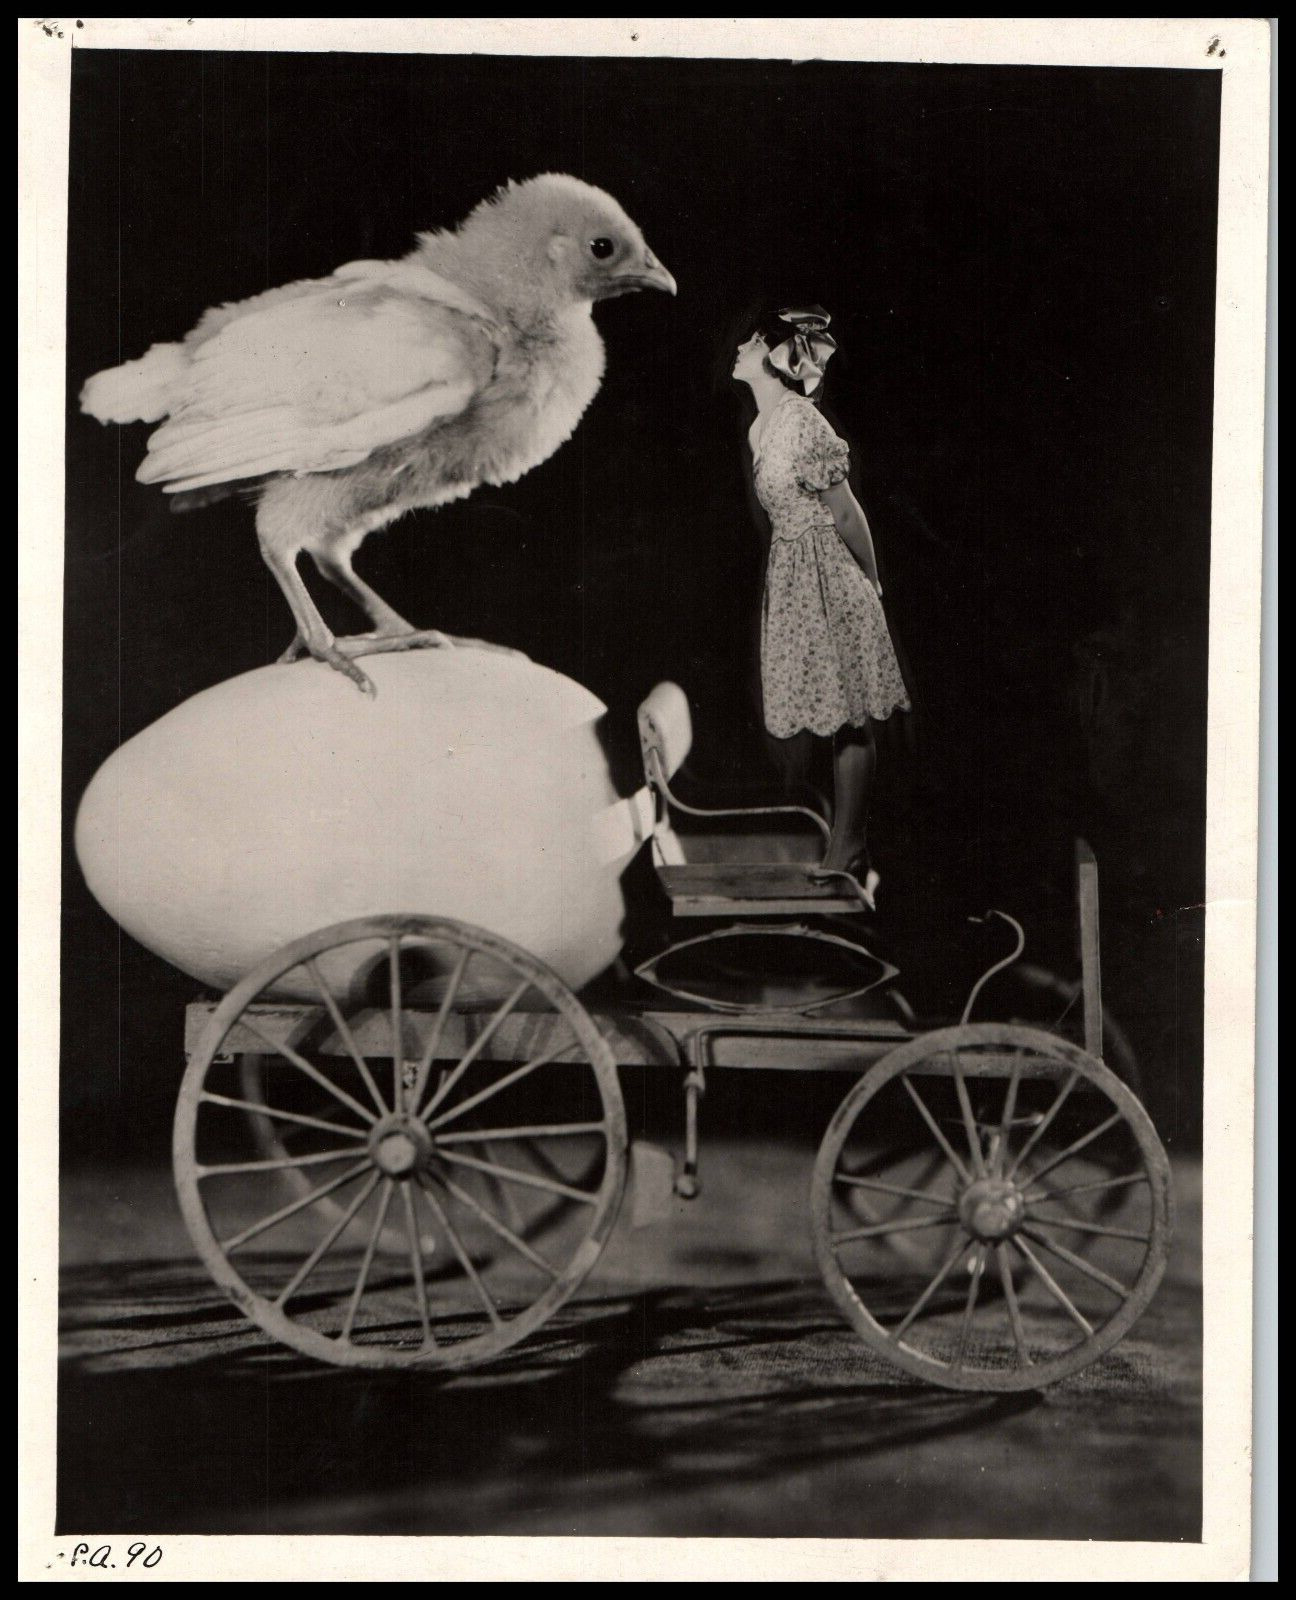 Hollywood Beauty DOROTHY GULLIVER & CHICKEN AWESOME PORTRAIT 1920s Photo 656